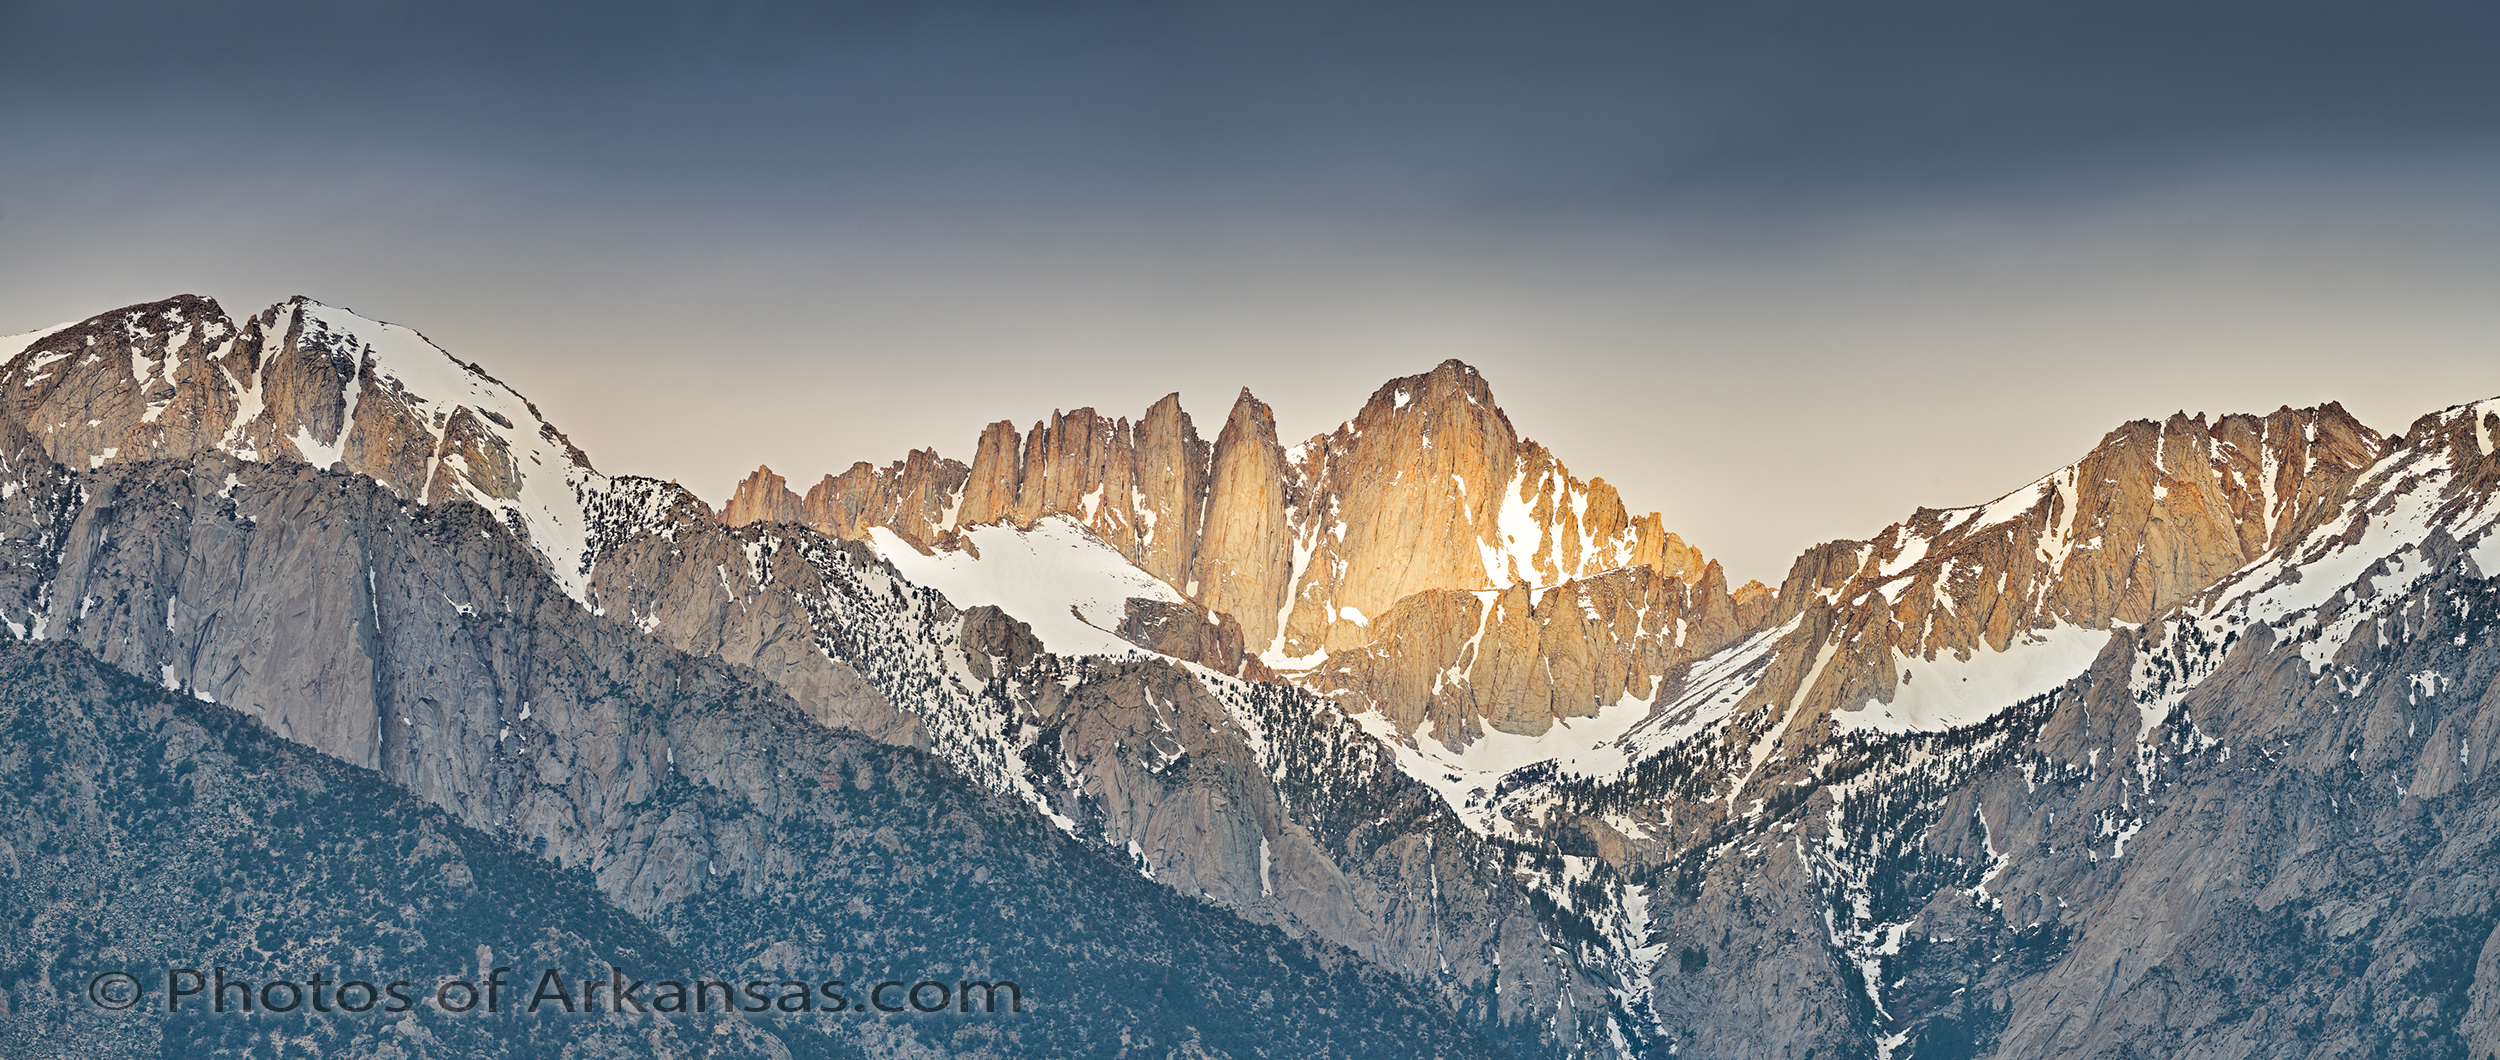 cw Close up no2 of Mt Whitney X-T2 4 part pano